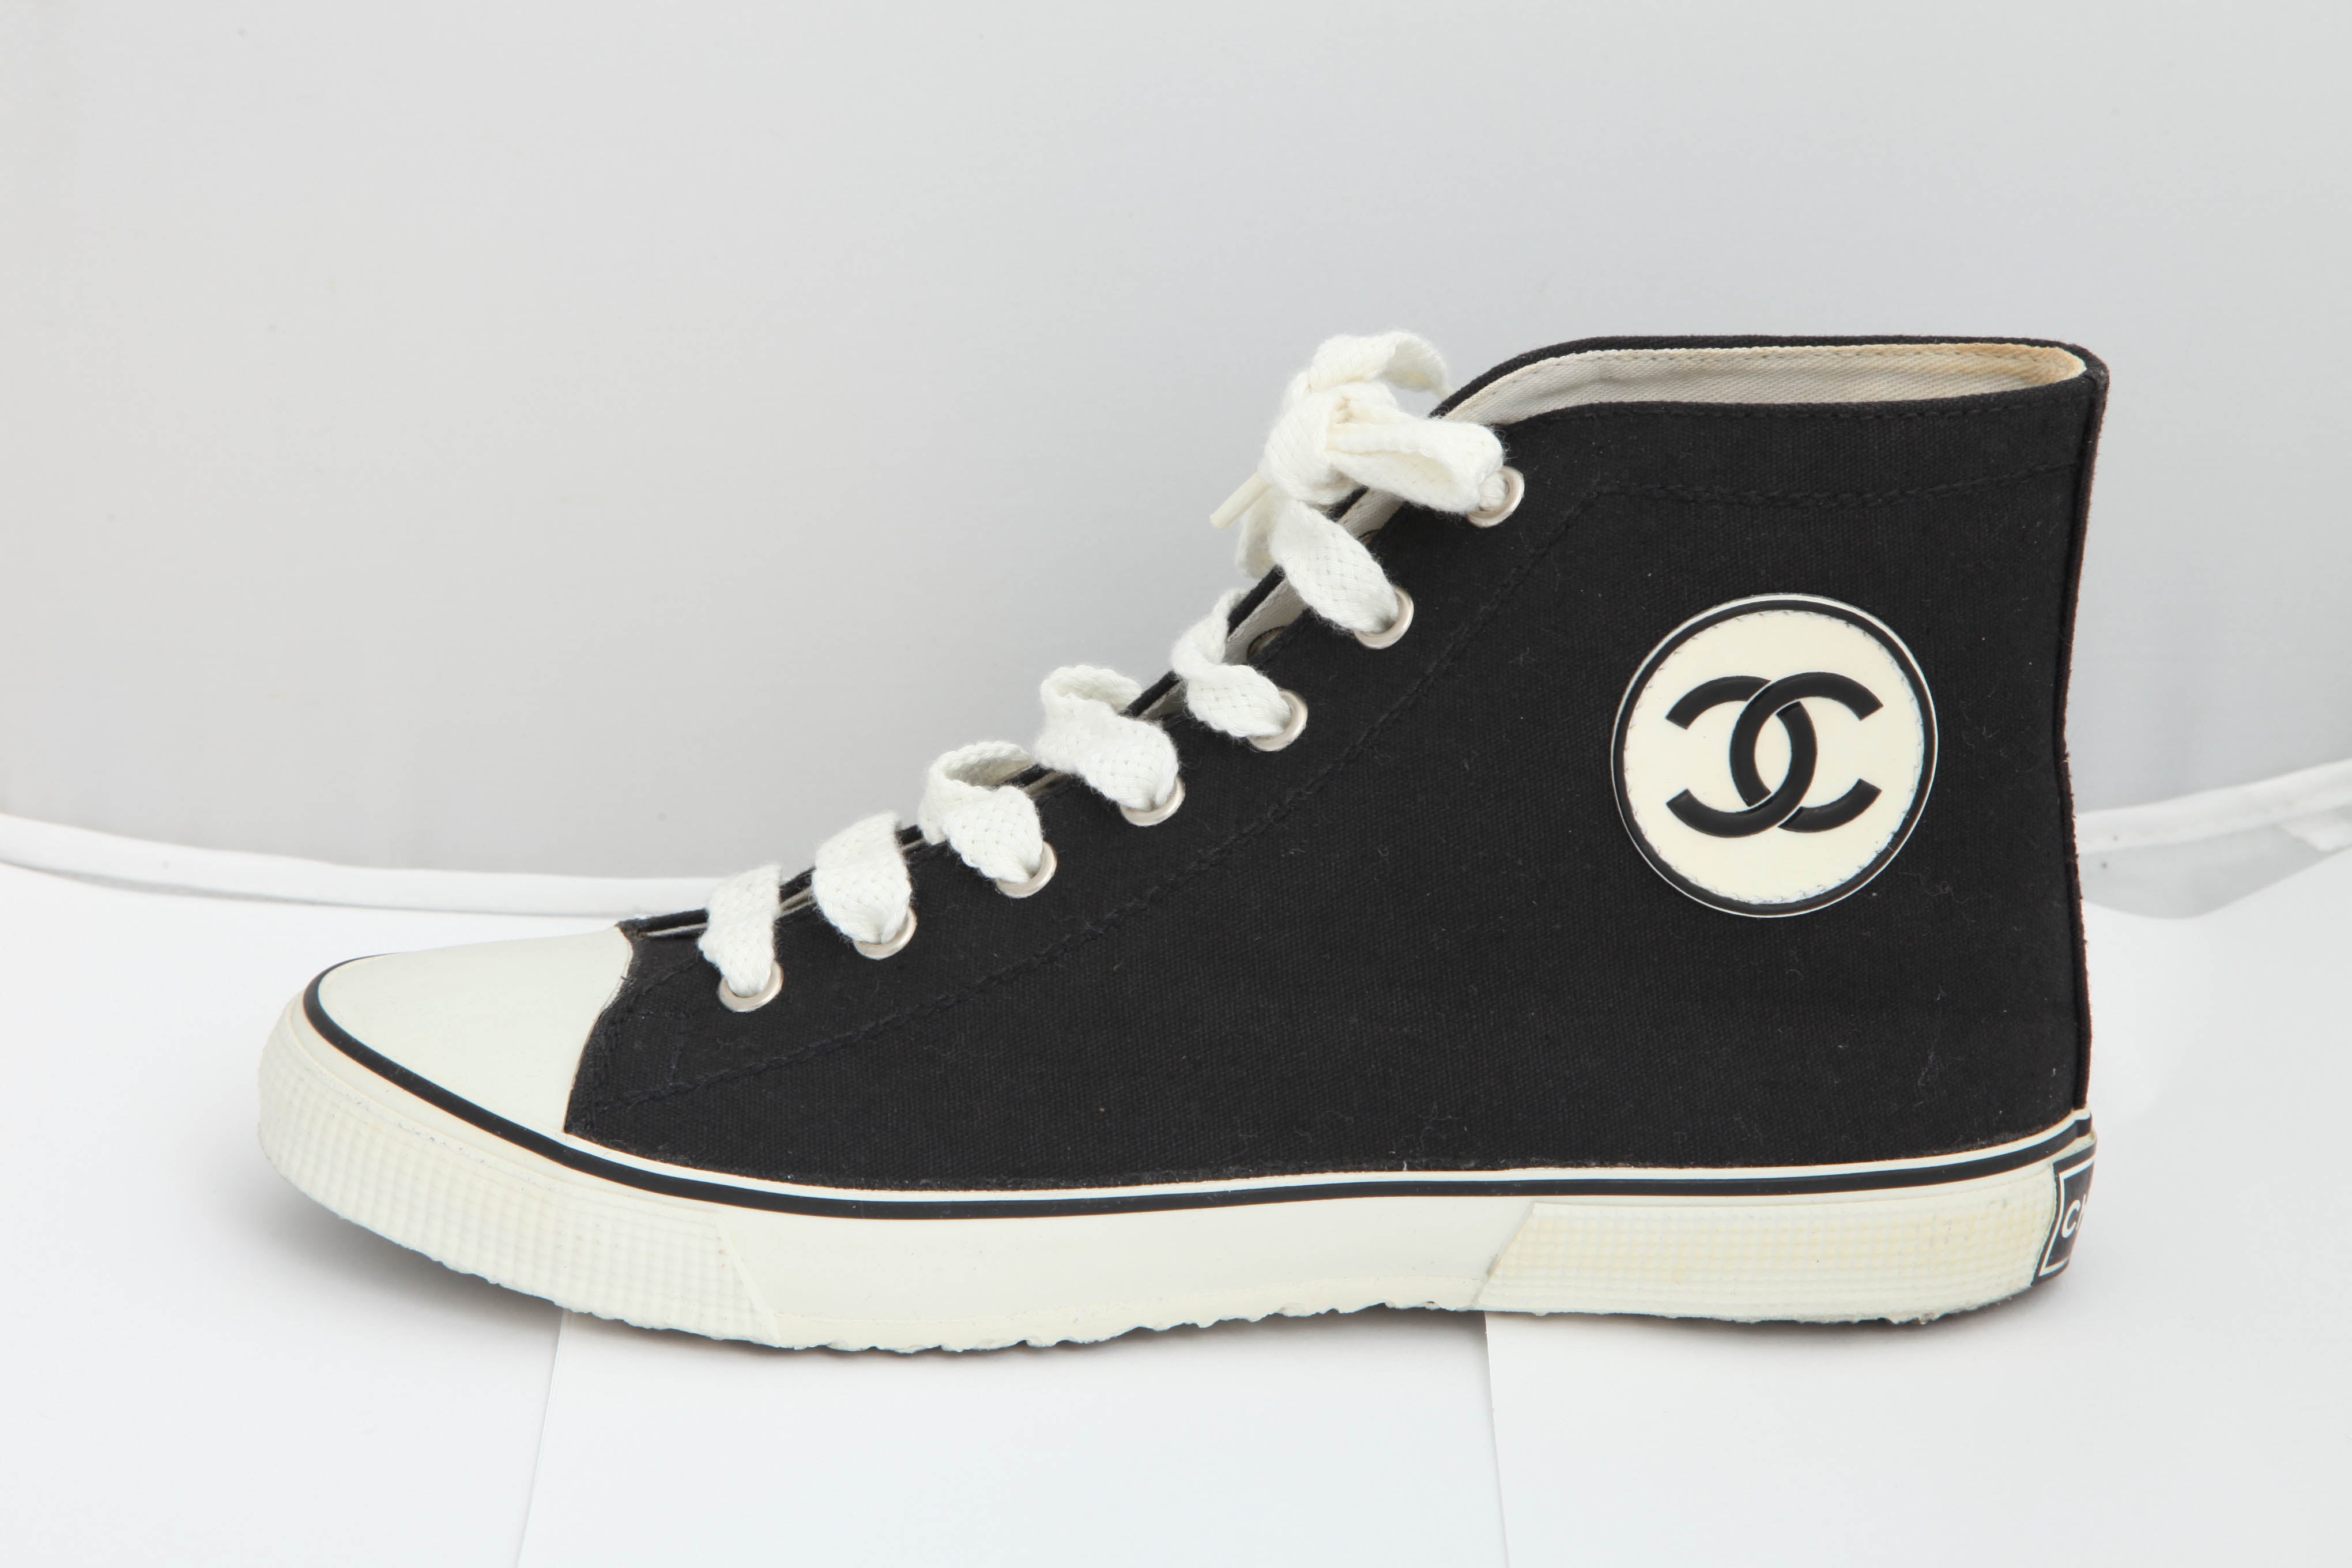 Rare Chanel Converse Style Sneakers For Sale at 1stDibs | chanel converse  sneakers, chanel converse shoes, converse chanel